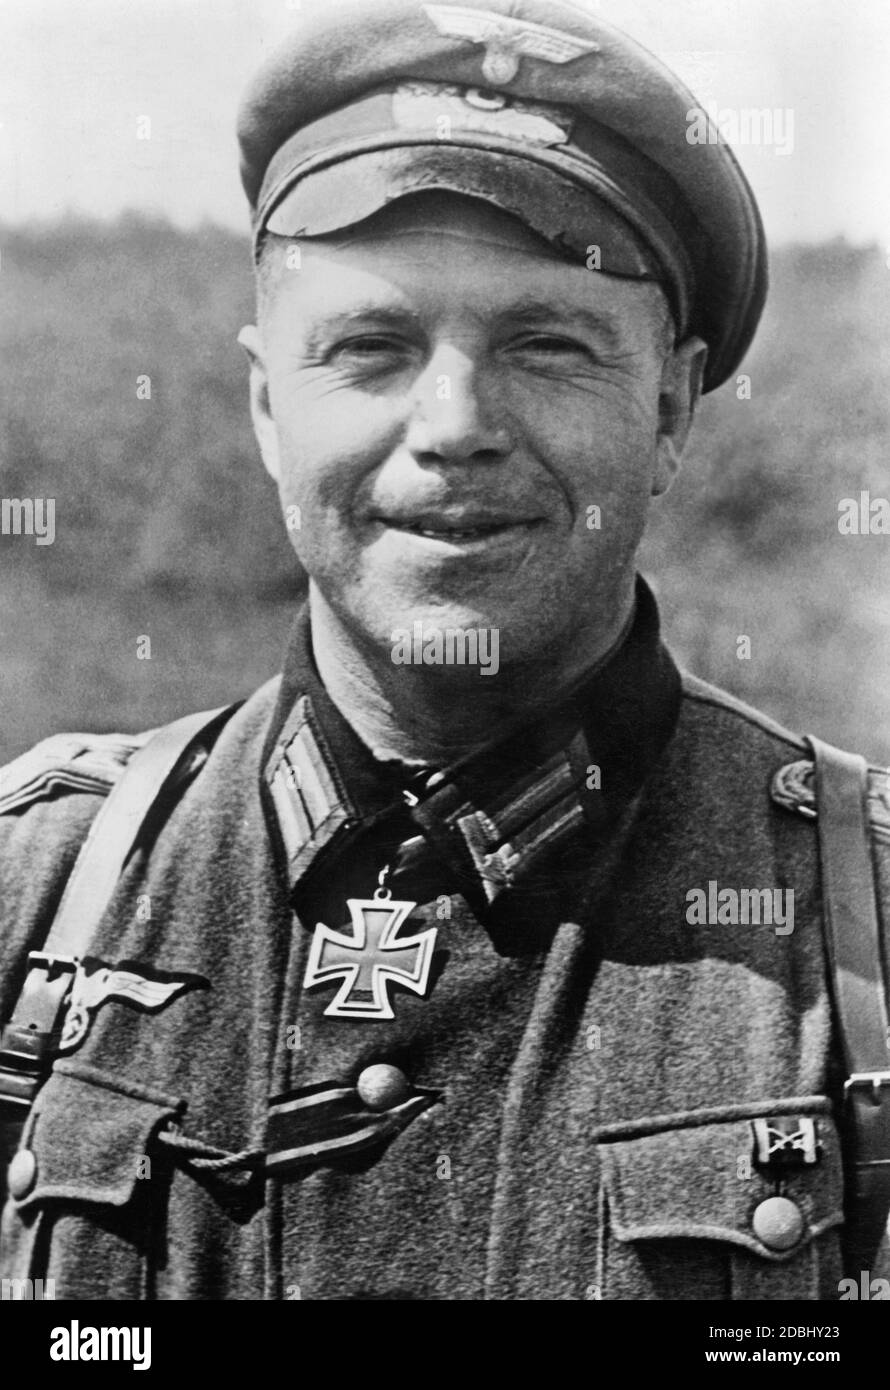 Captain Ernst Emmert, I./Infanterieregiment 282, with the Knight's Cross in 1941. The date is the bestowal date. Stock Photo